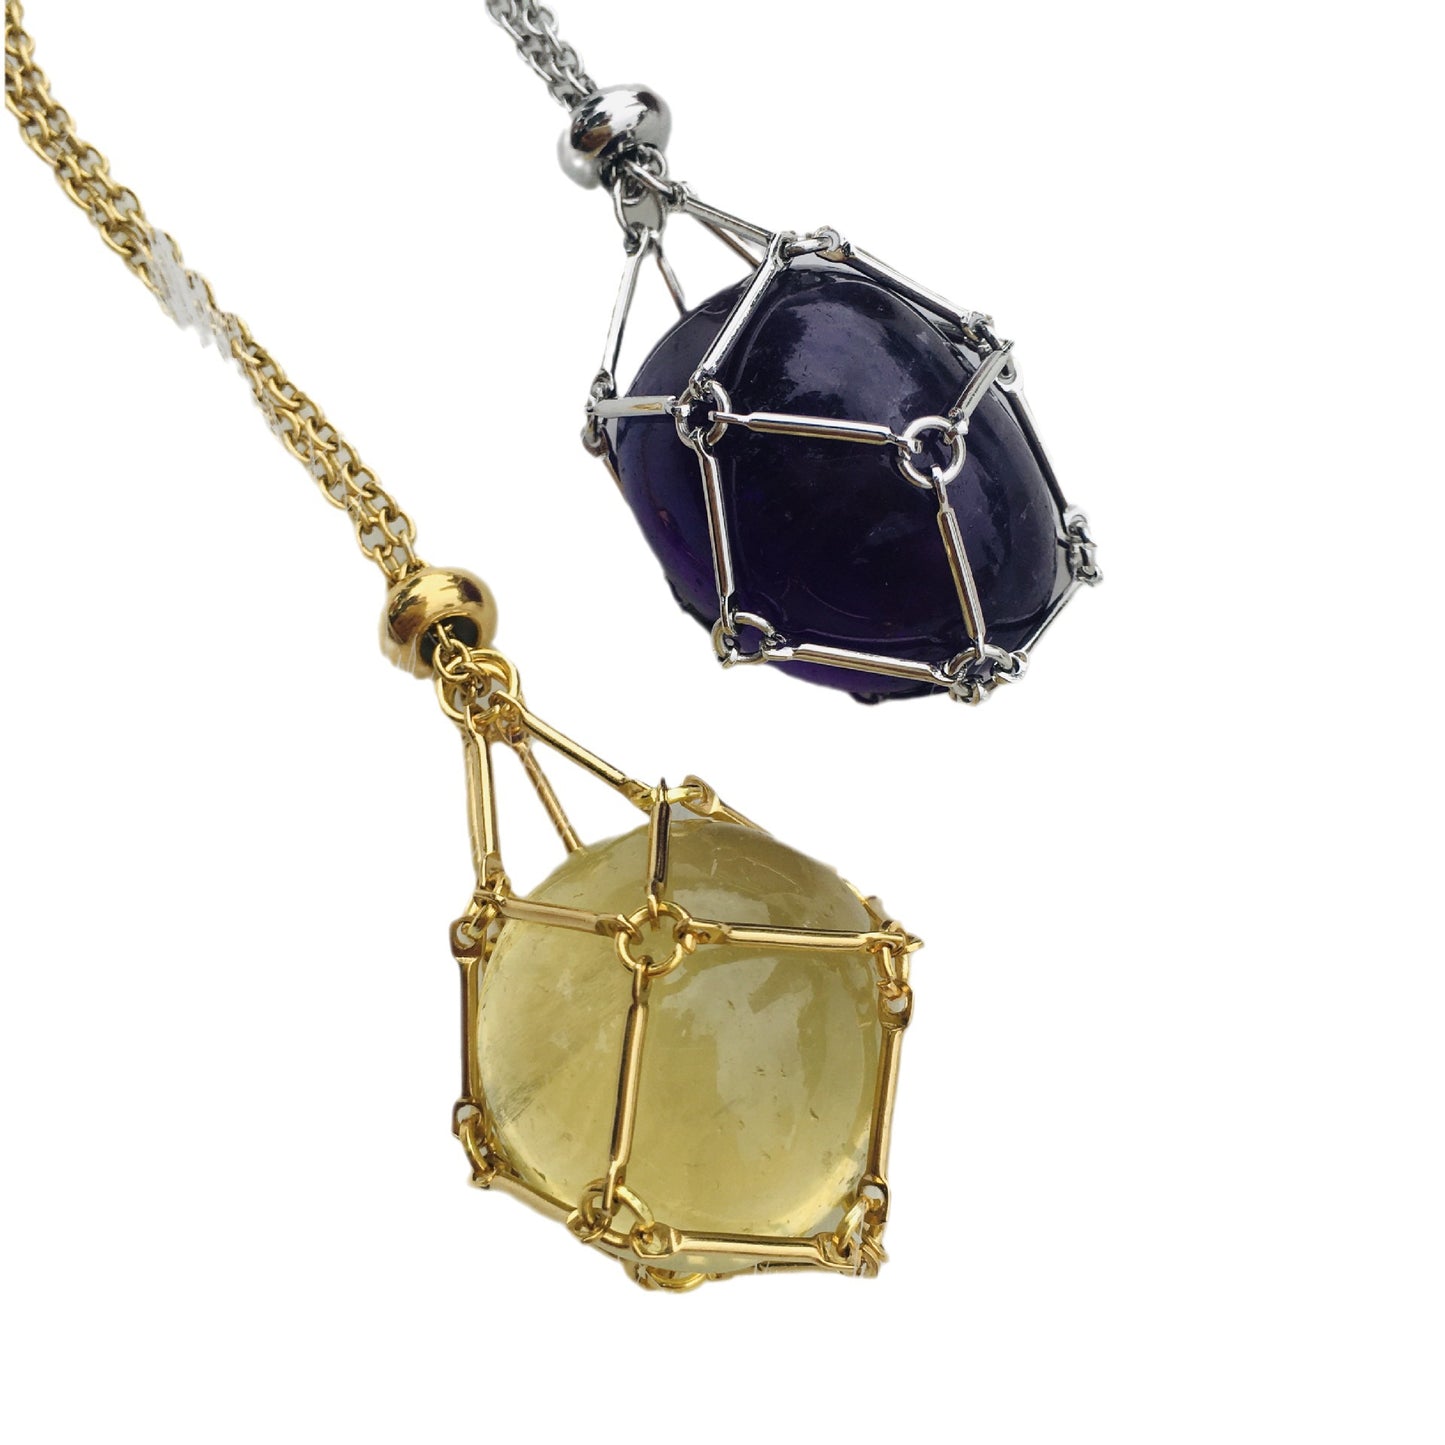 Shop Fashion Jewelry: Natural Crystal Mesh Bag and Bamboo Necklace